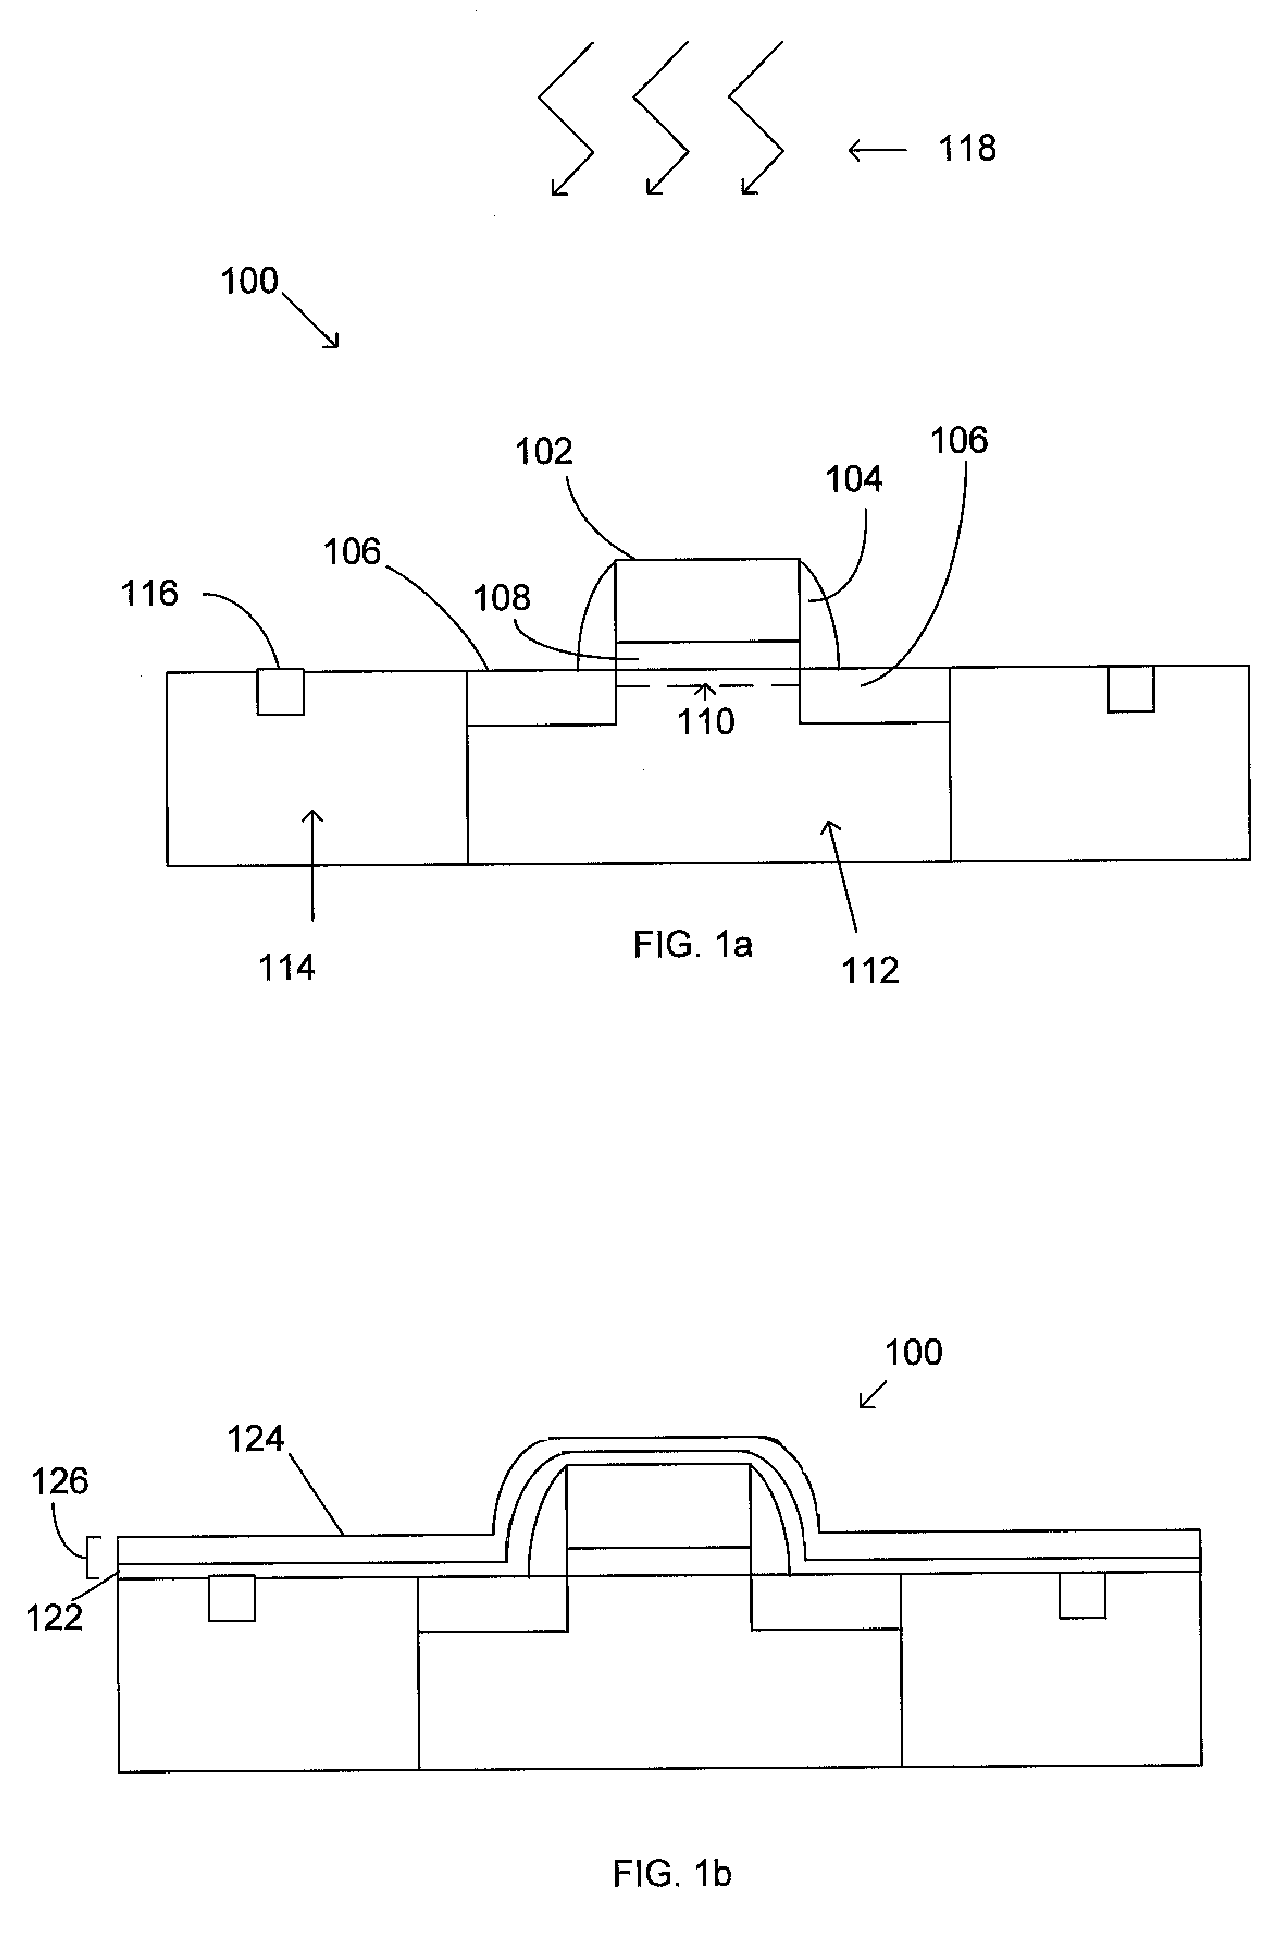 Methods of forming a multilayer capping film to minimize differential heating in anneal processes